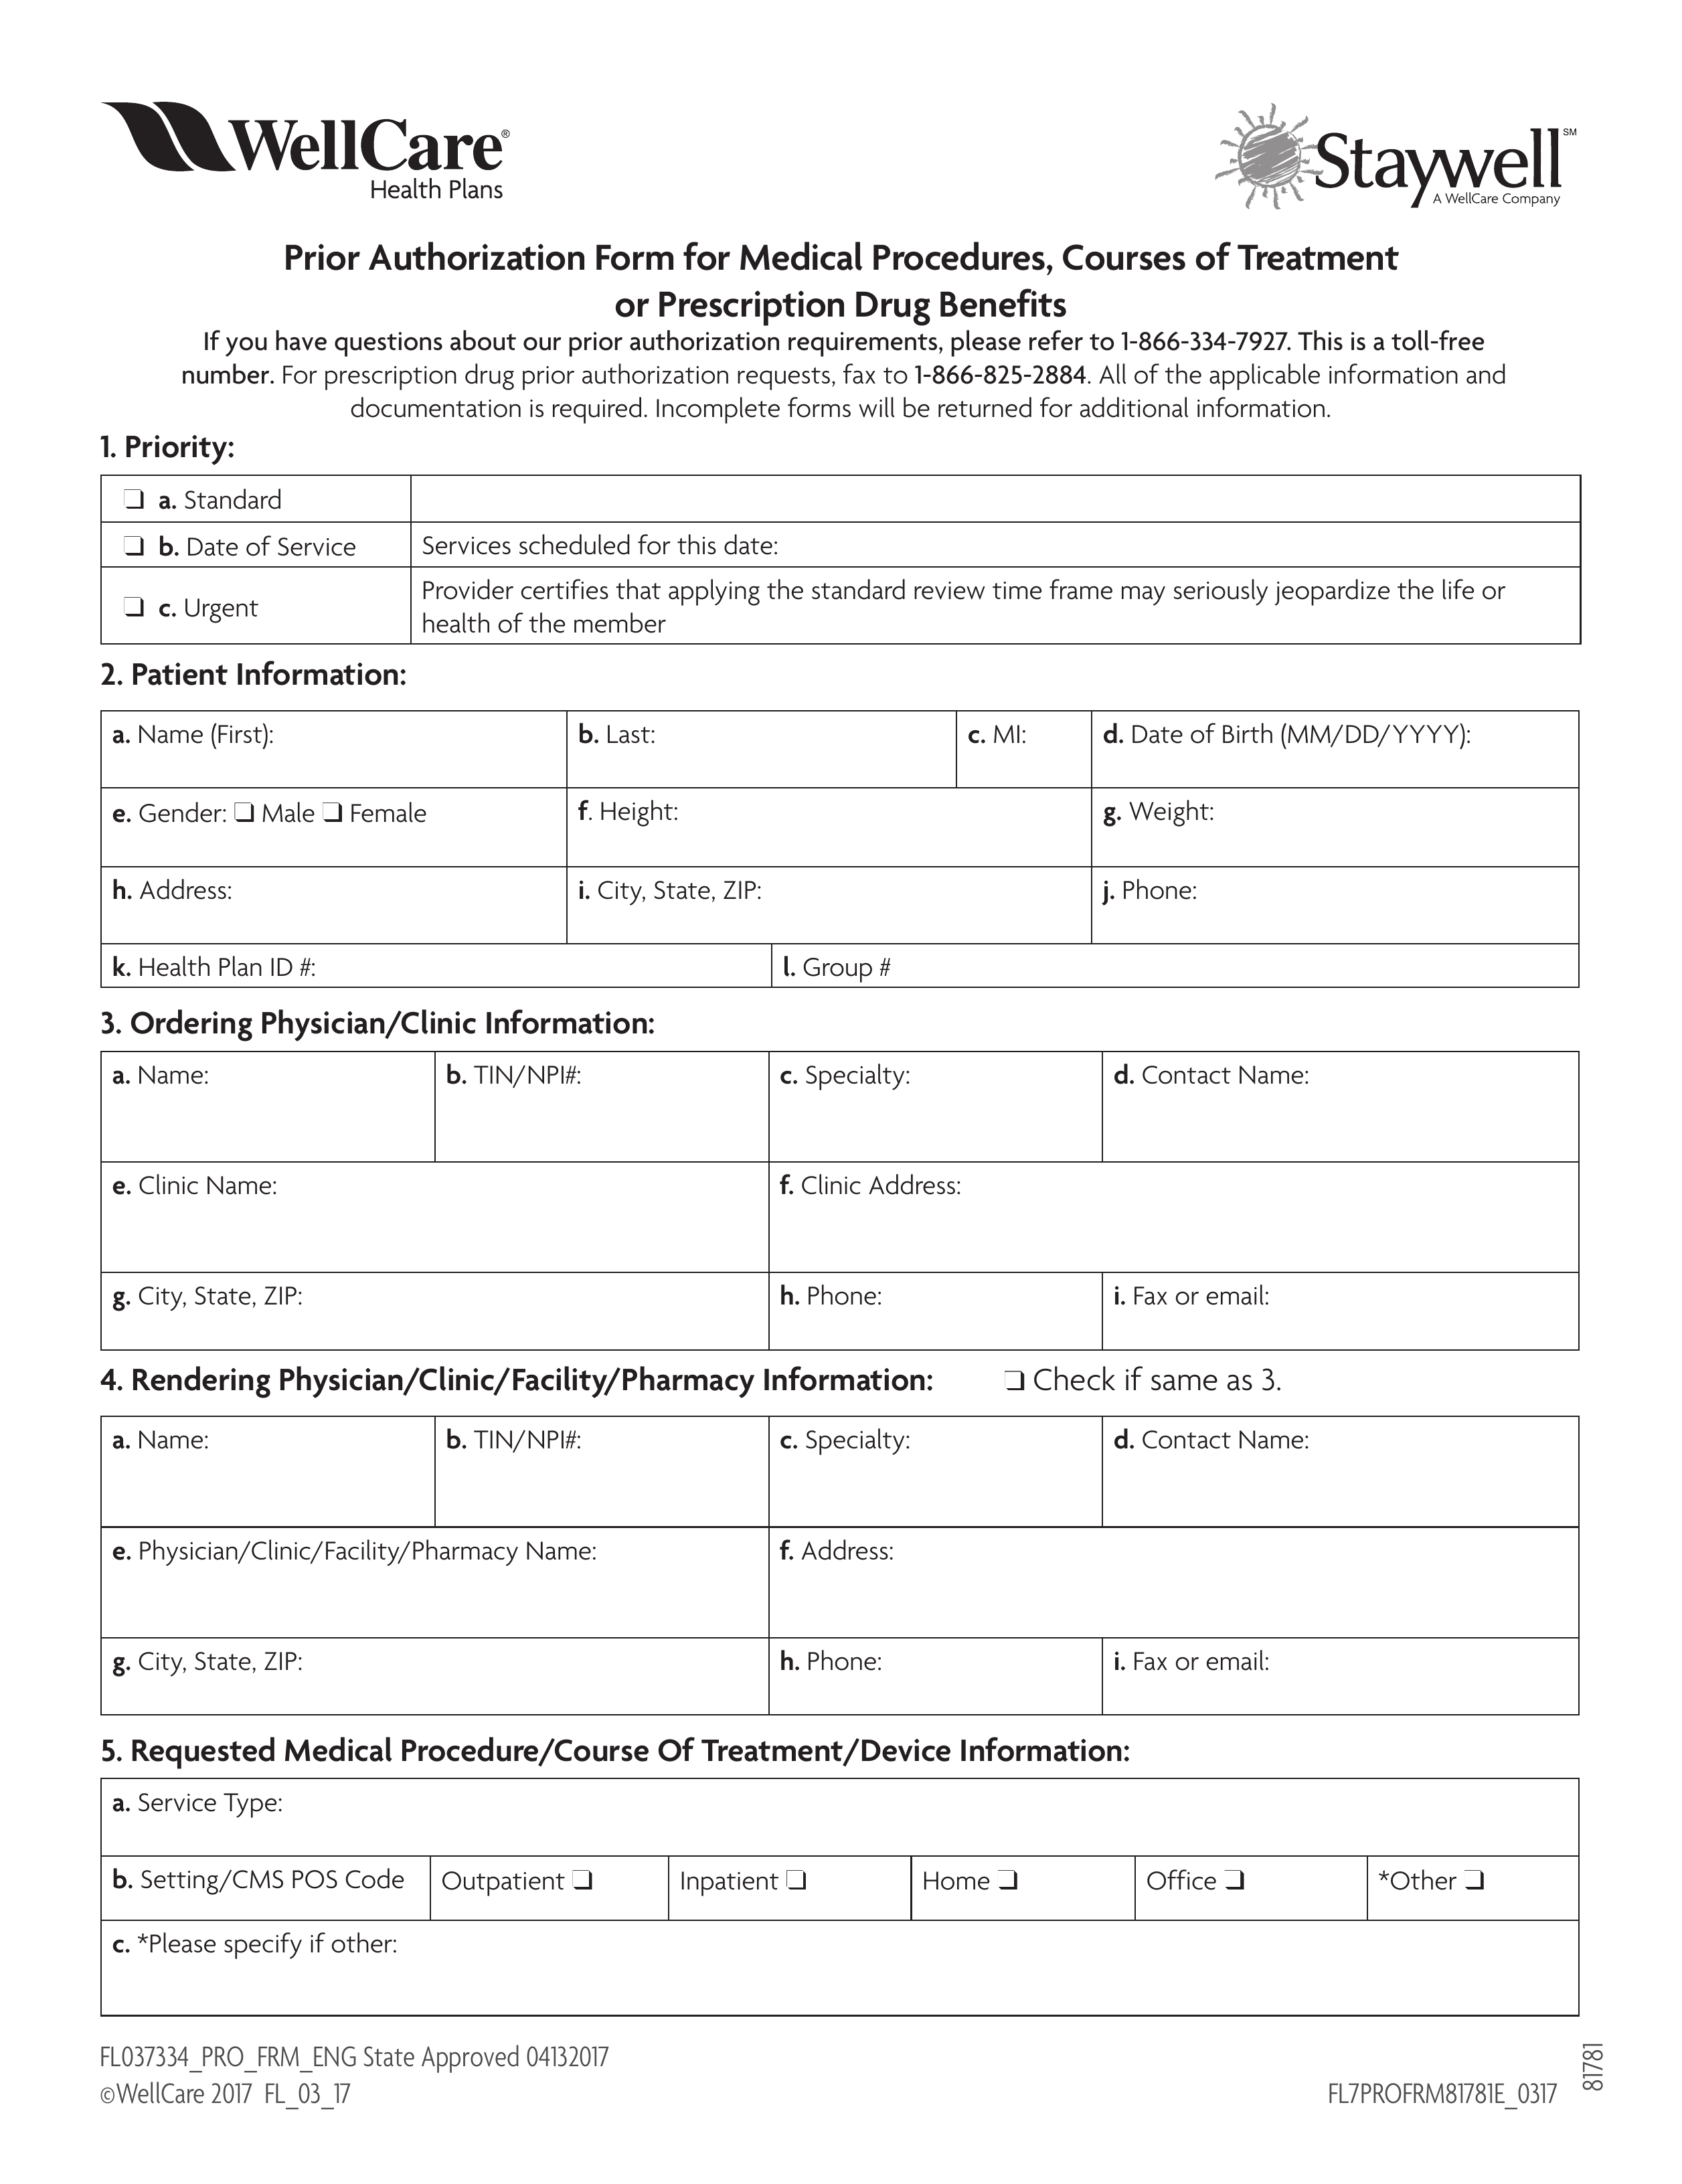 free-wellcare-prior-rx-authorization-form-pdf-eforms